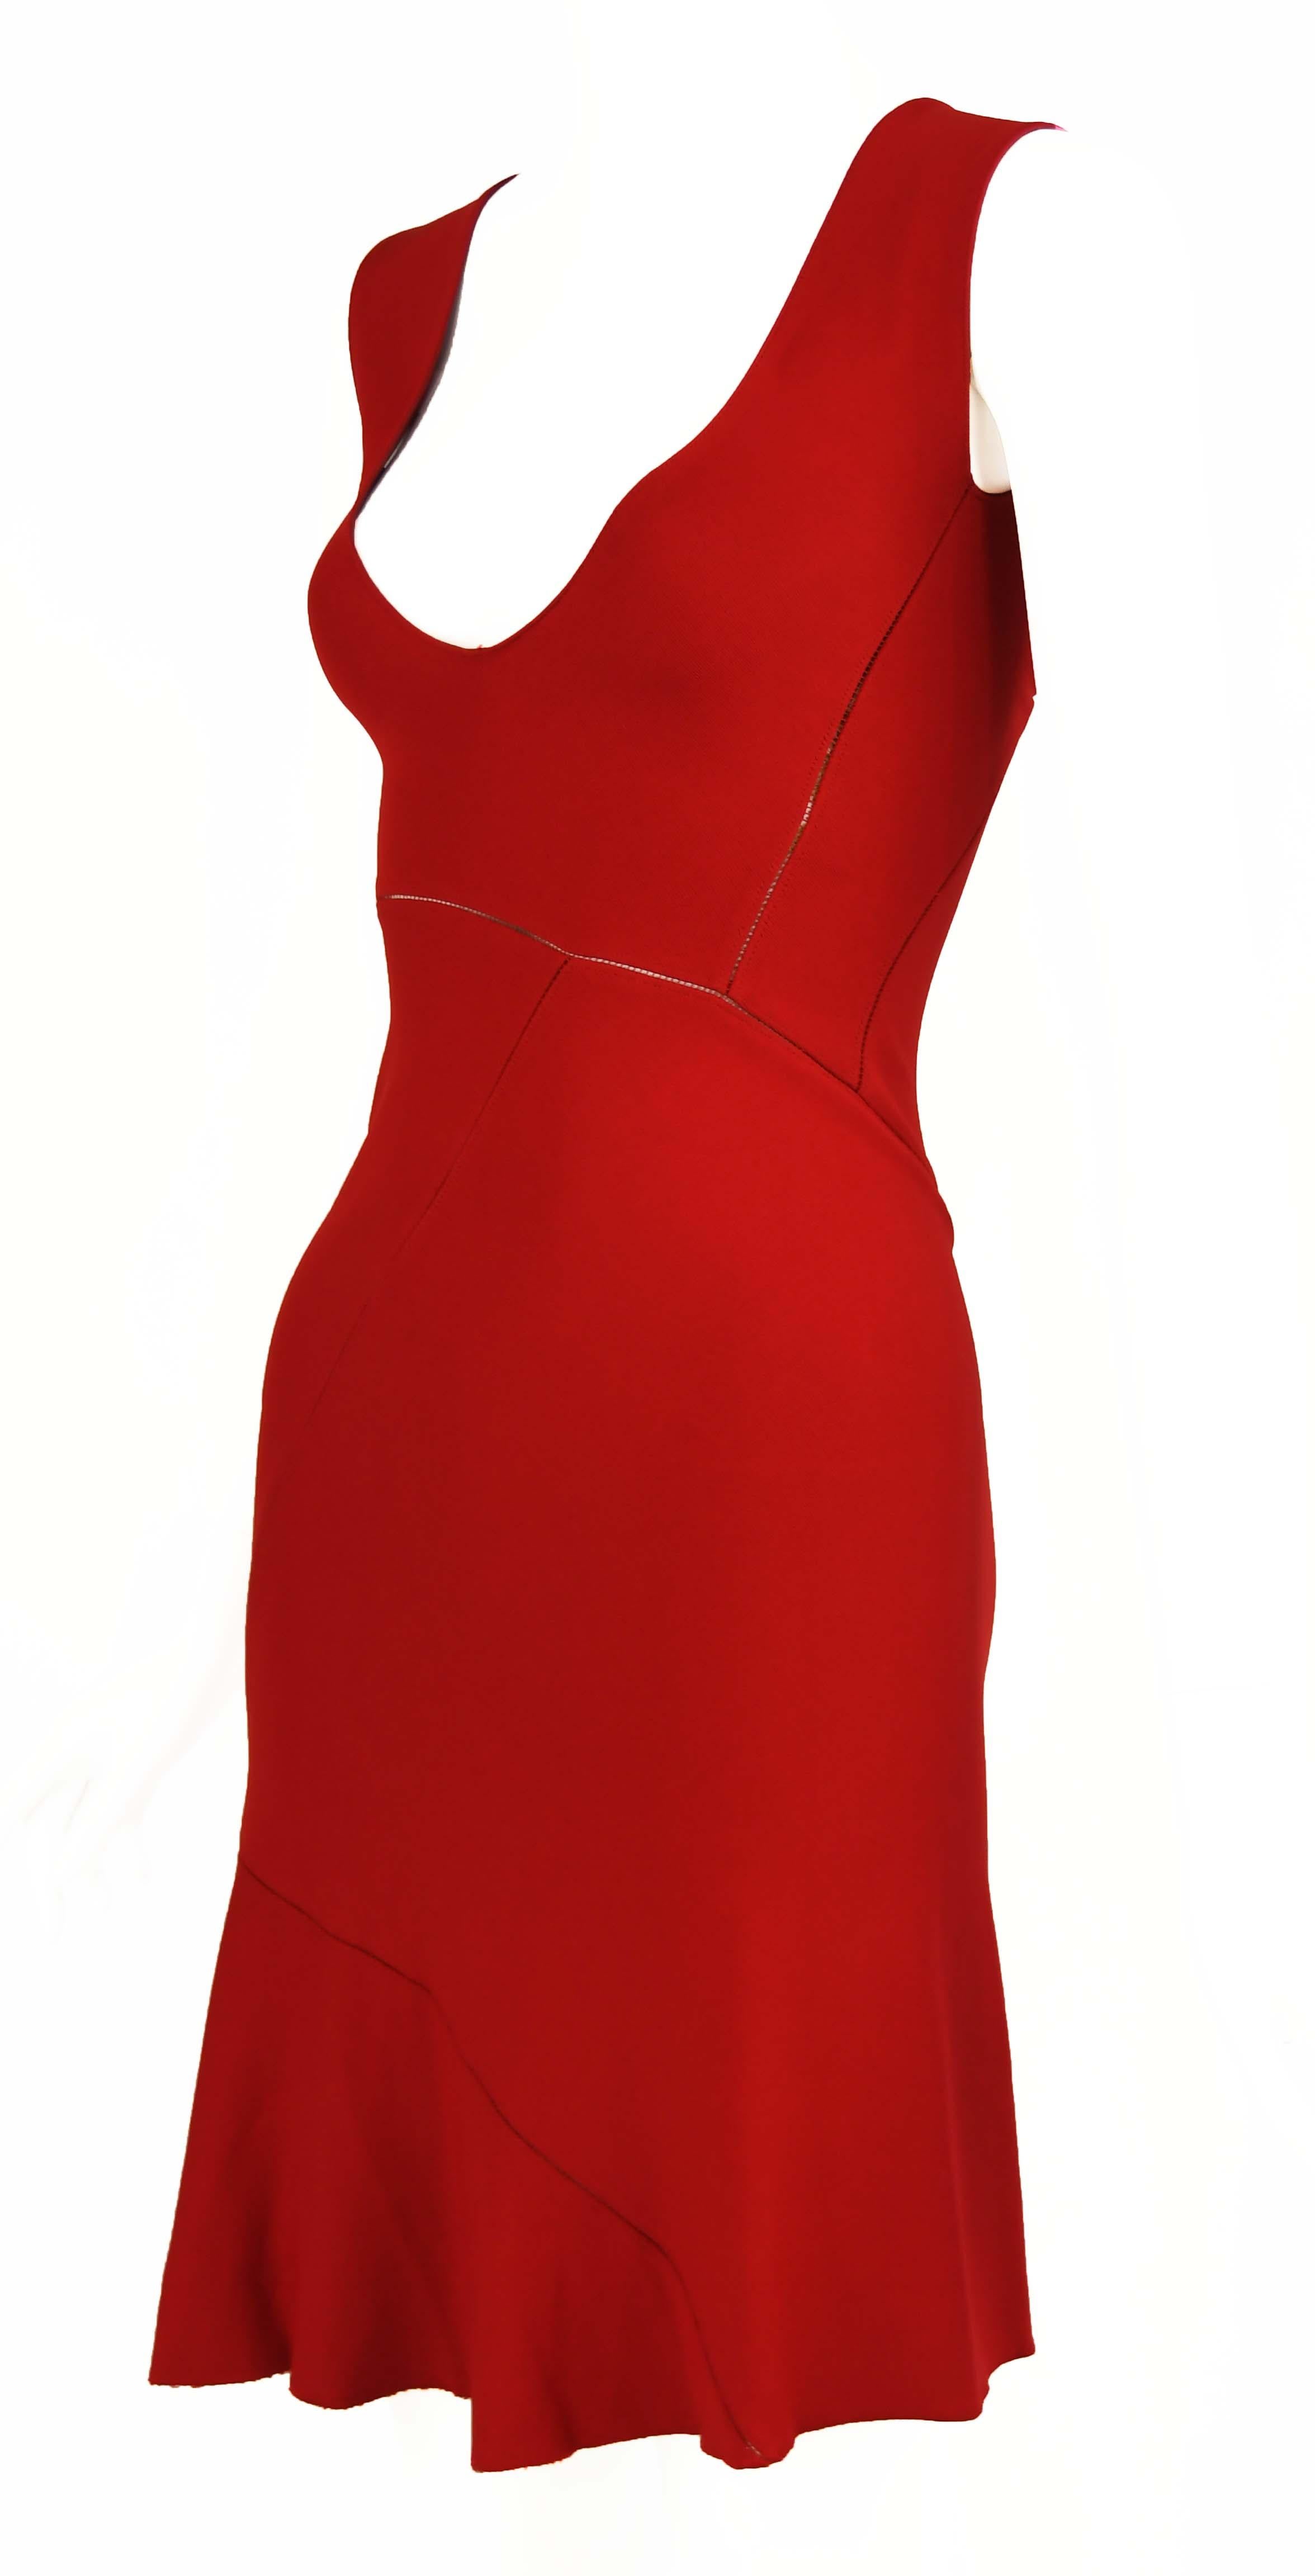 Sleeveless, vintage Alaia red dress featuring asymmetrical seams with a slight peak-a-boo effect.  Sexy v neck and fitted through the bodice.

Size: Size not marked but approximate small

Condition: Excellent vintage condition

Composition: Missing